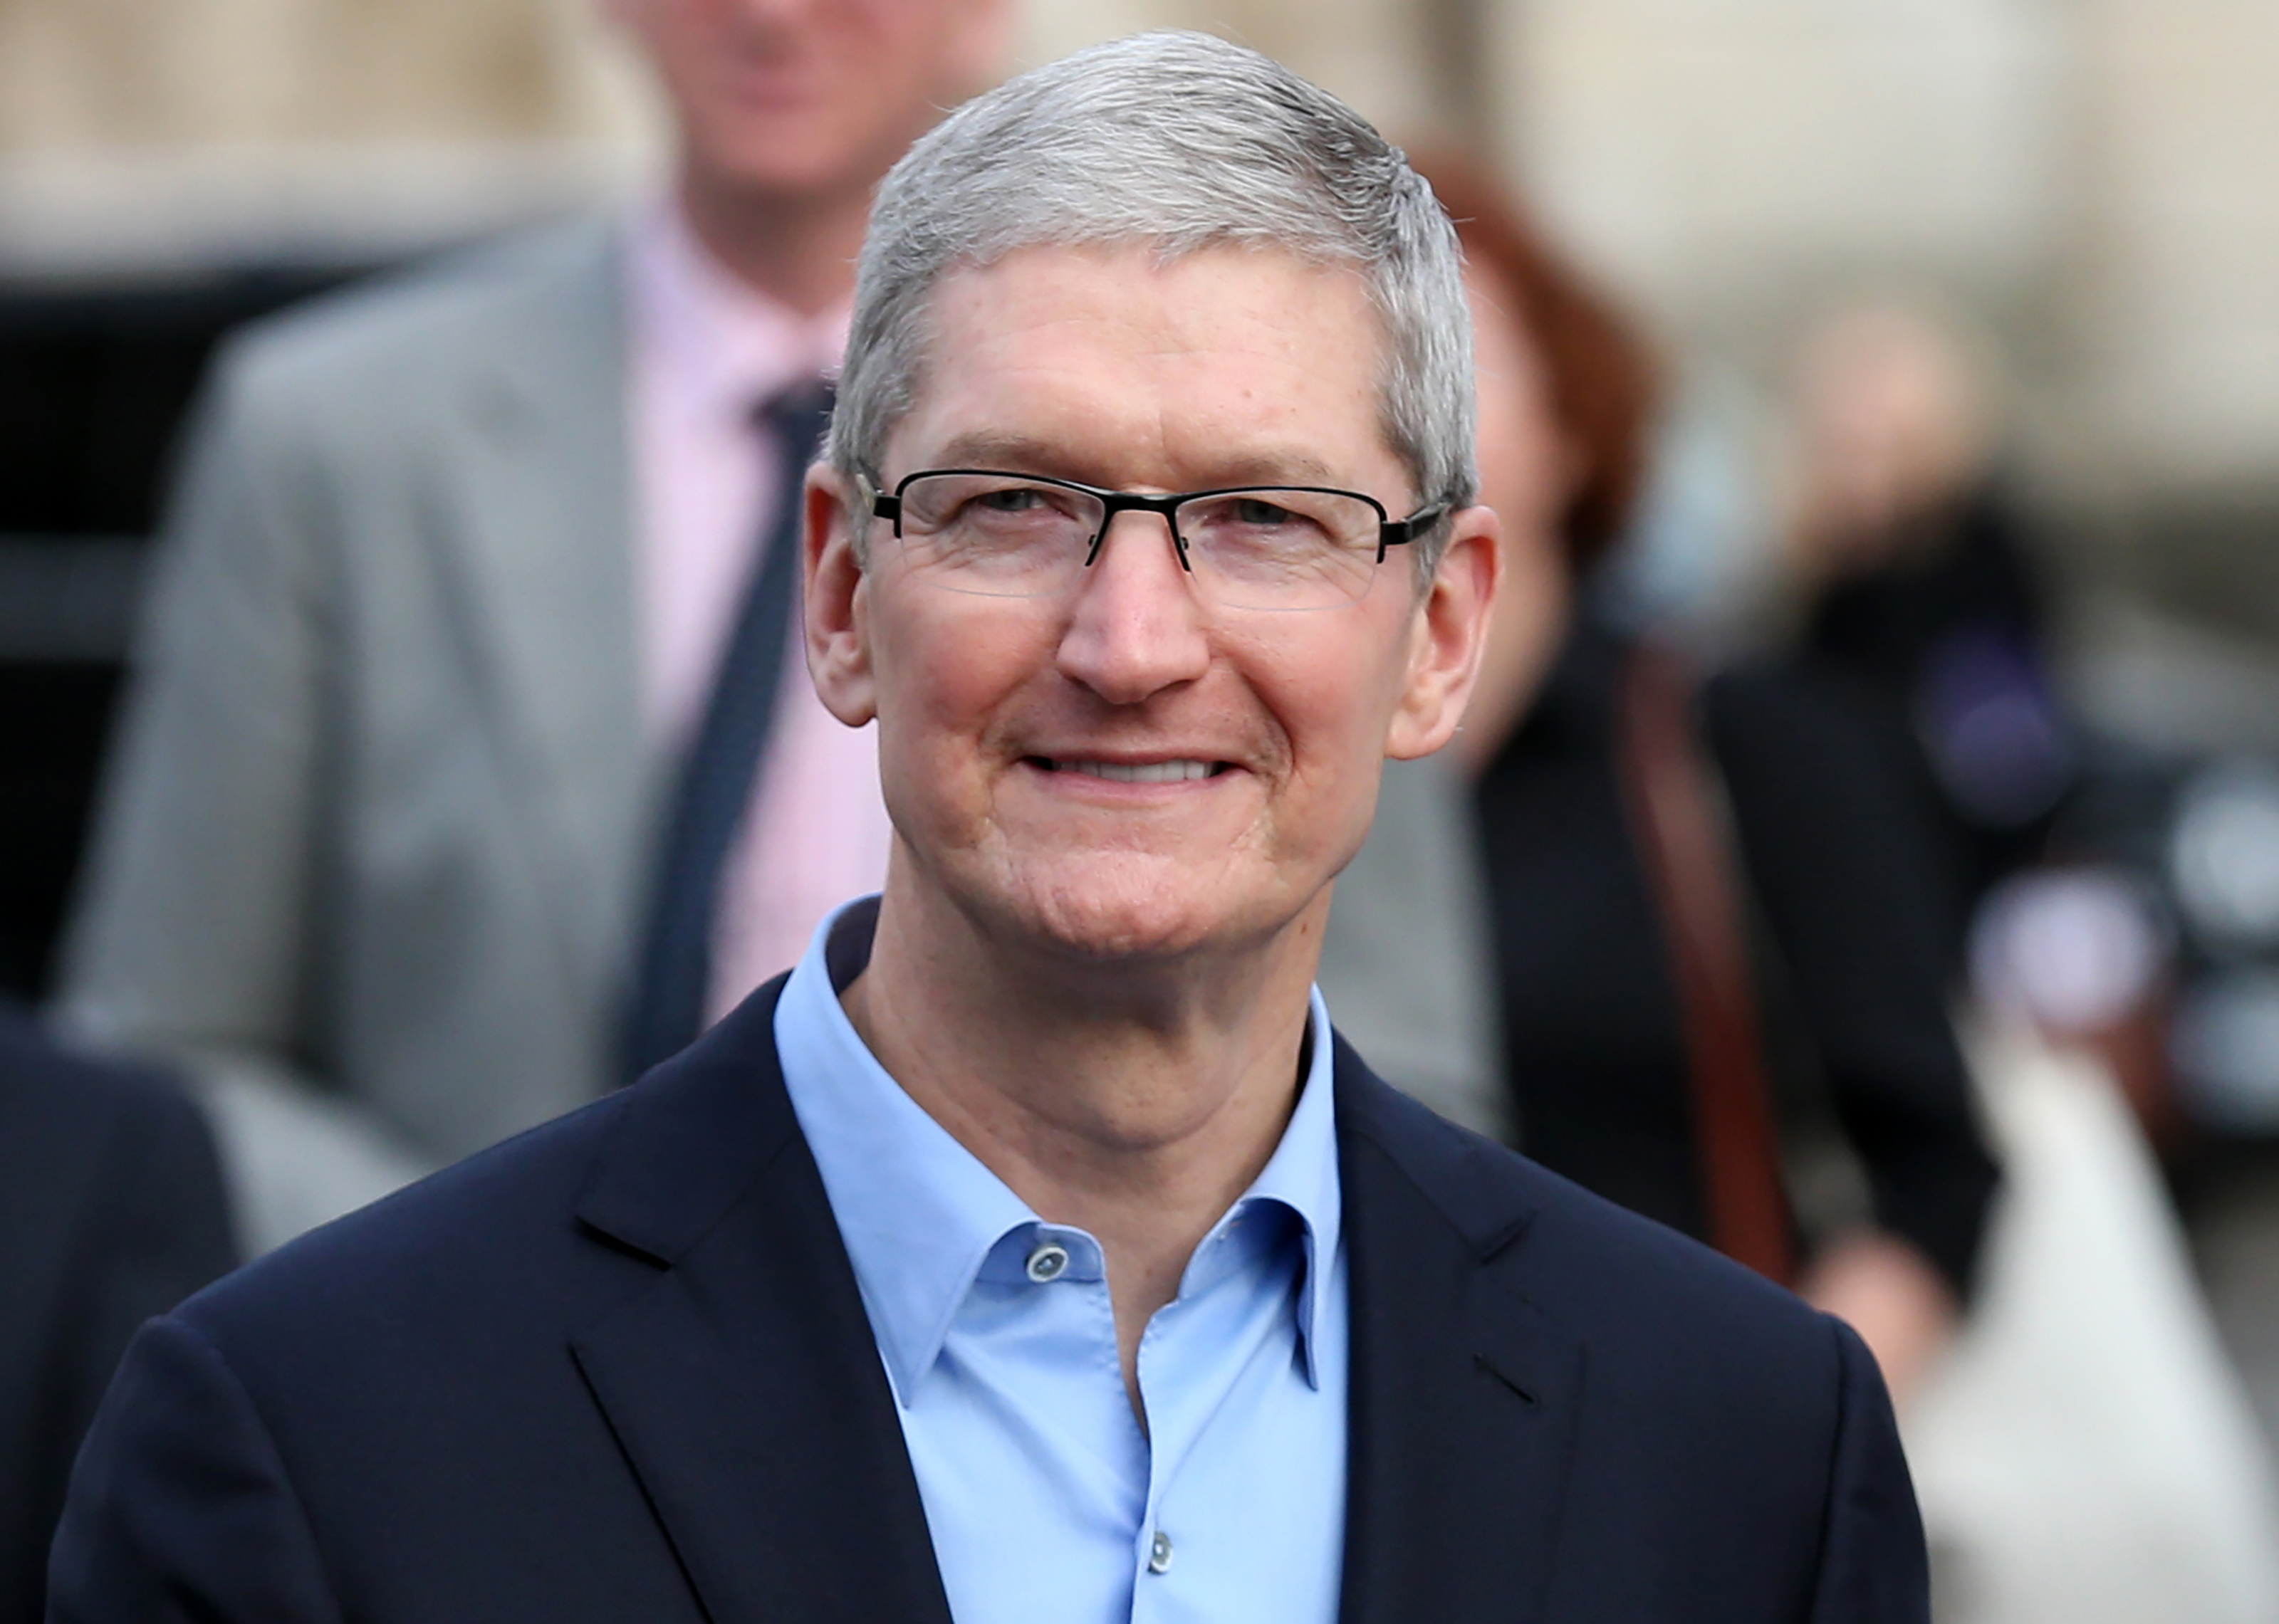 Apple's Tim Cook wakes at 3.45am every day. Image: Laura Hutton/Shutterstock